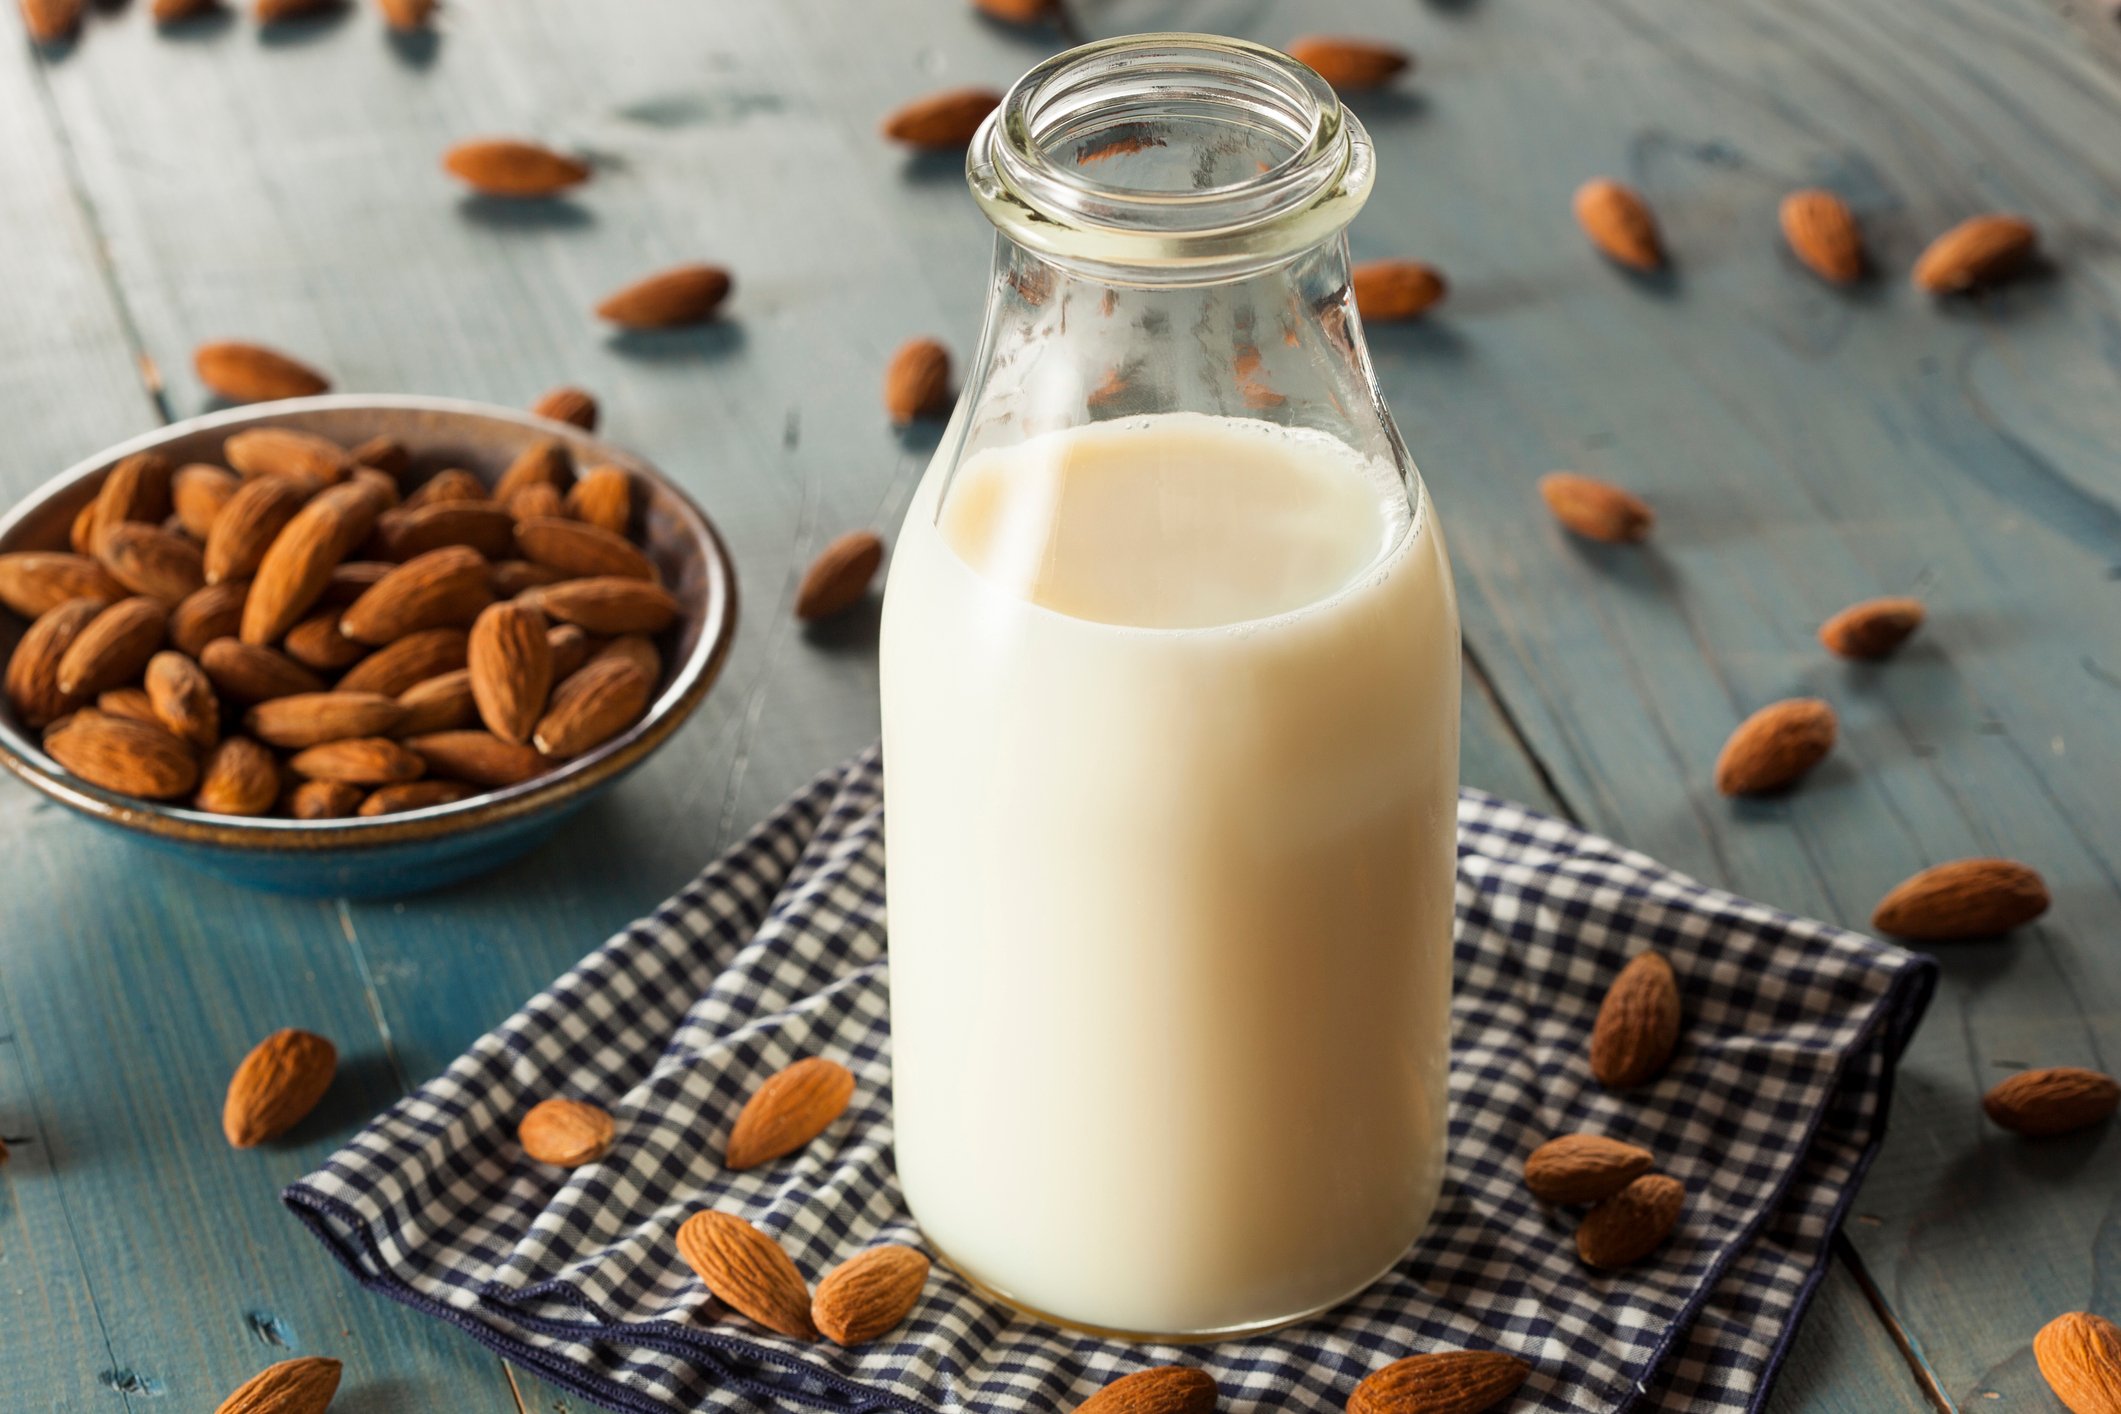 Almond milk is one of the easiest and most nutritious milks you can make at home. (iStock Photo)